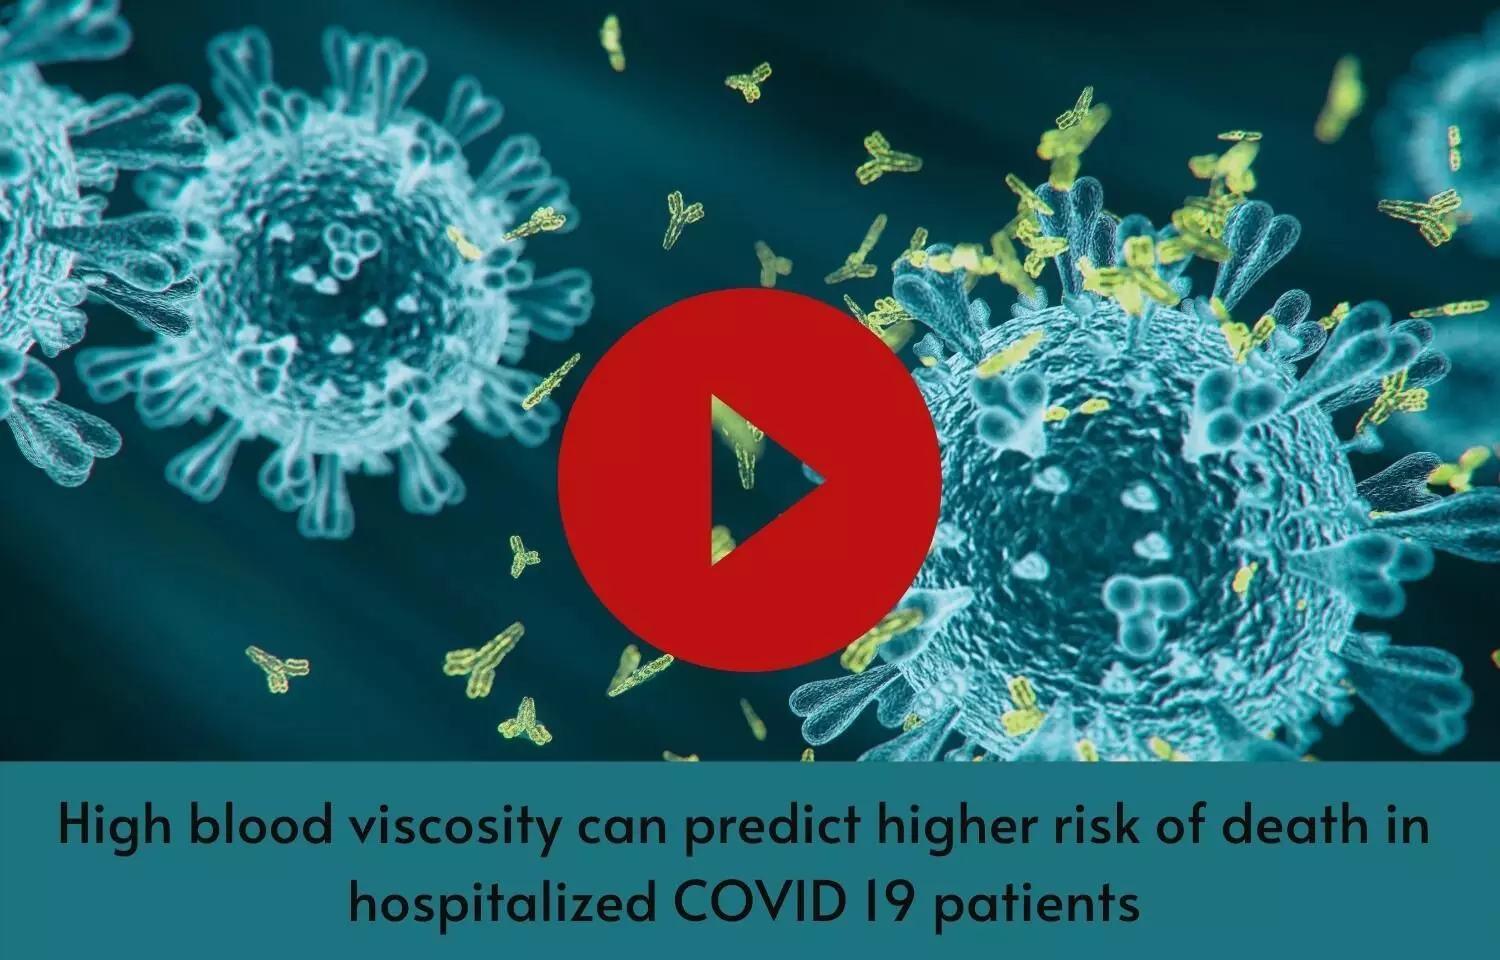 High blood viscosity can predict higher risk of death in hospitalized COVID 19 patients